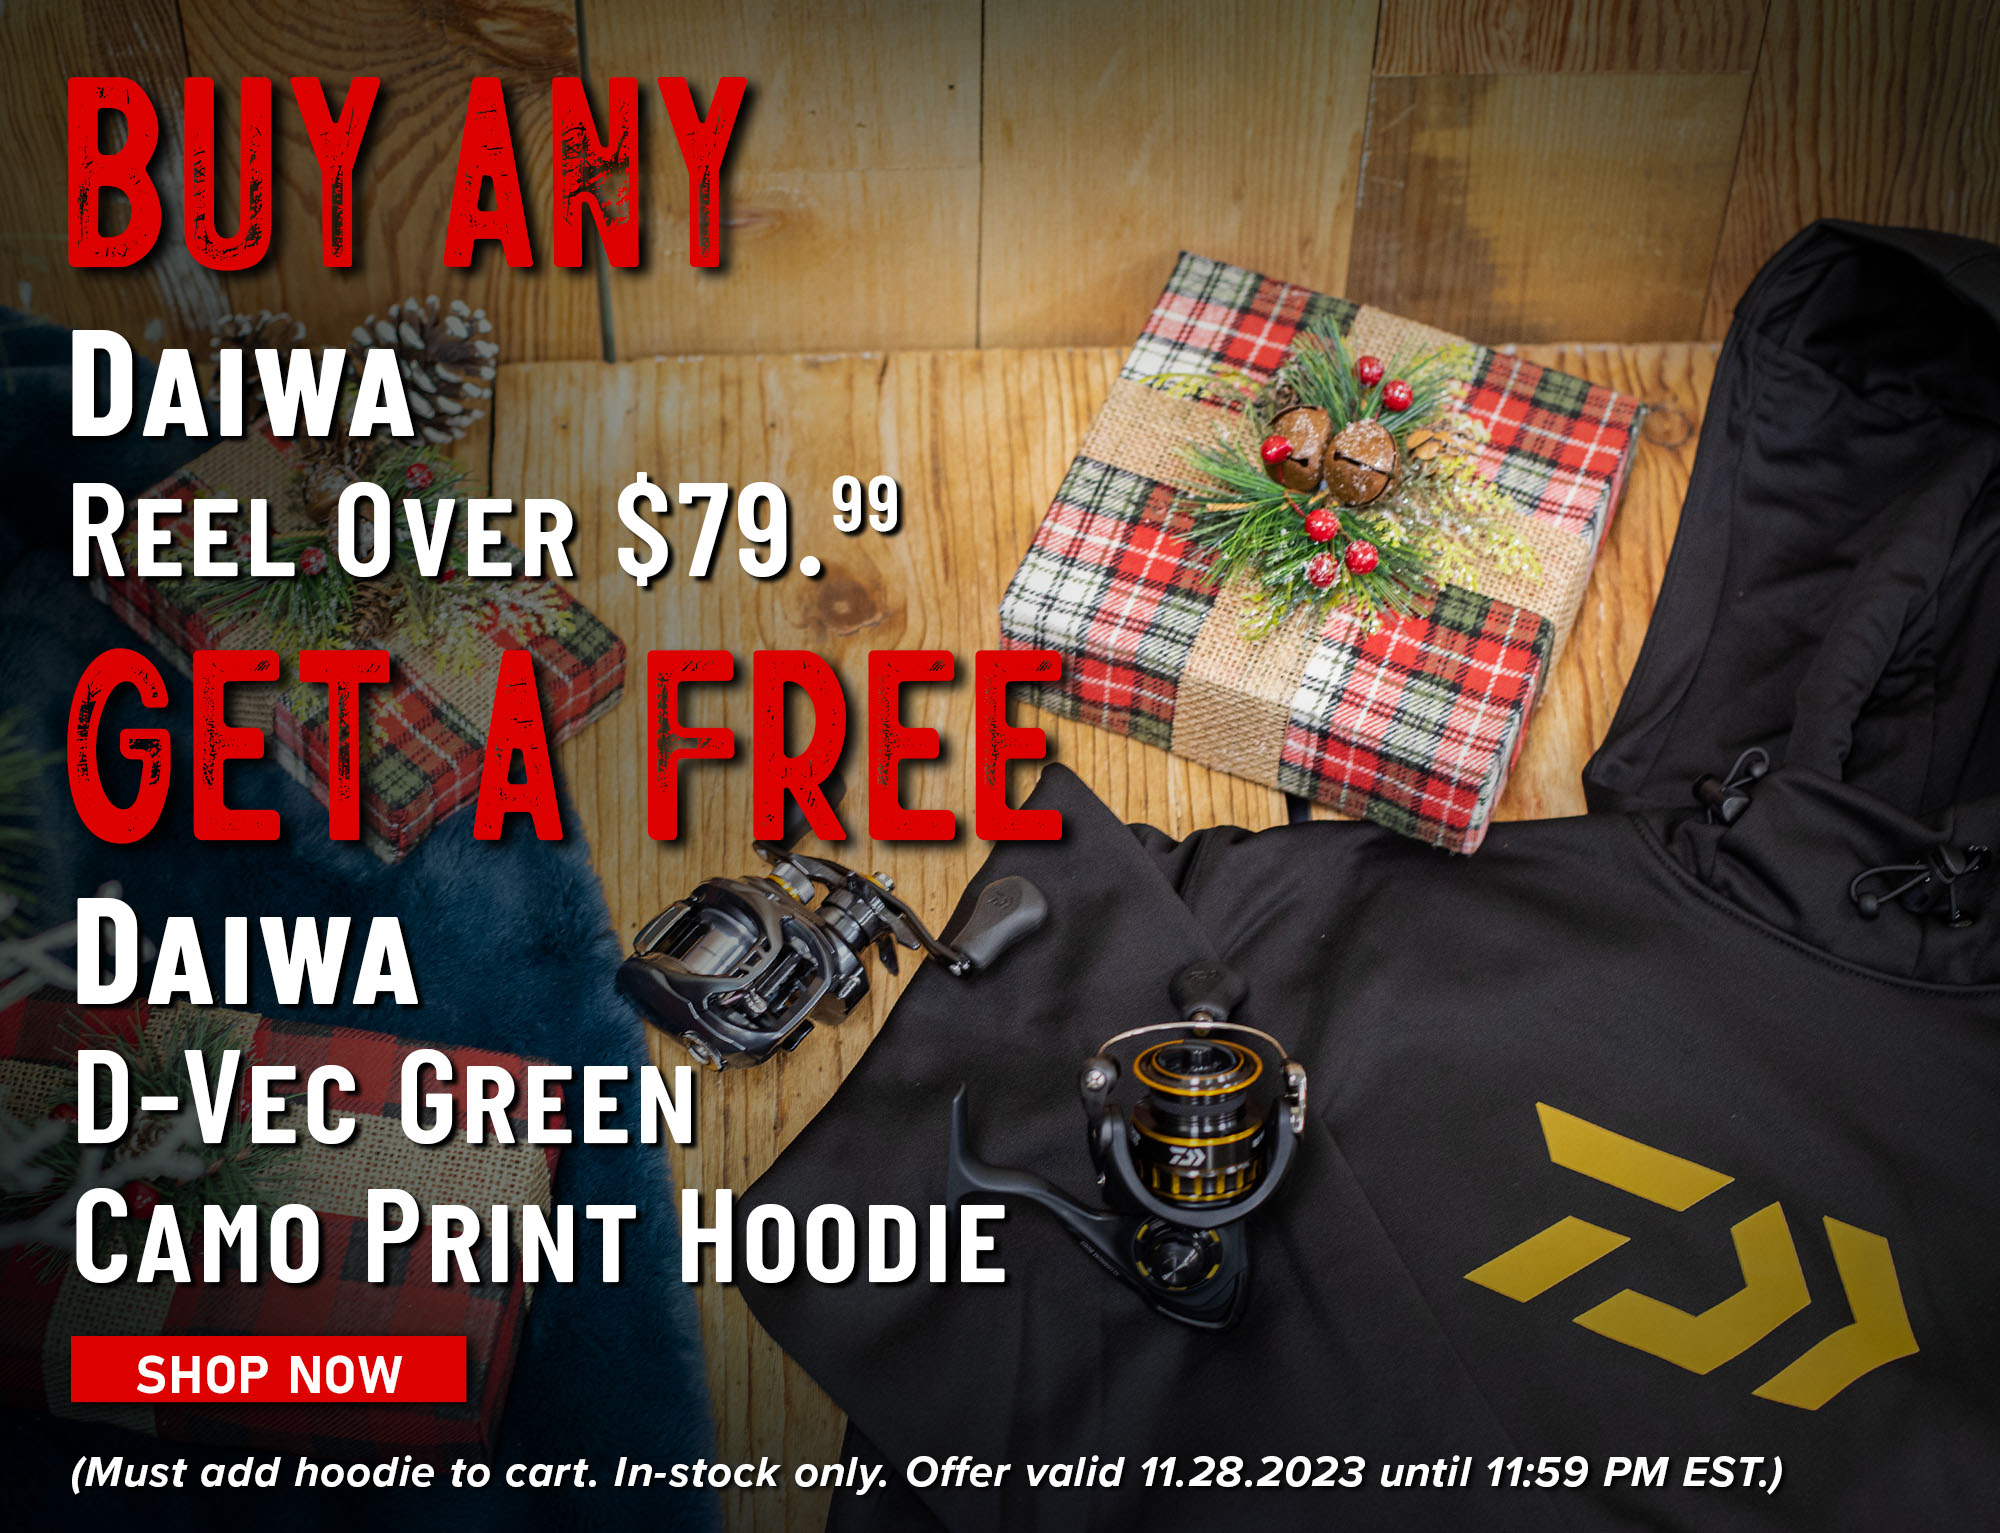 Buy Any Daiwa Reel Over $79.99 Get a Free Daiwa D-Vec Green Camo Print Hoodie Shop Now (Must add hoodie to cart. In-stock only. Offer valid 11.28.2023 until 11:59 PM EST.)